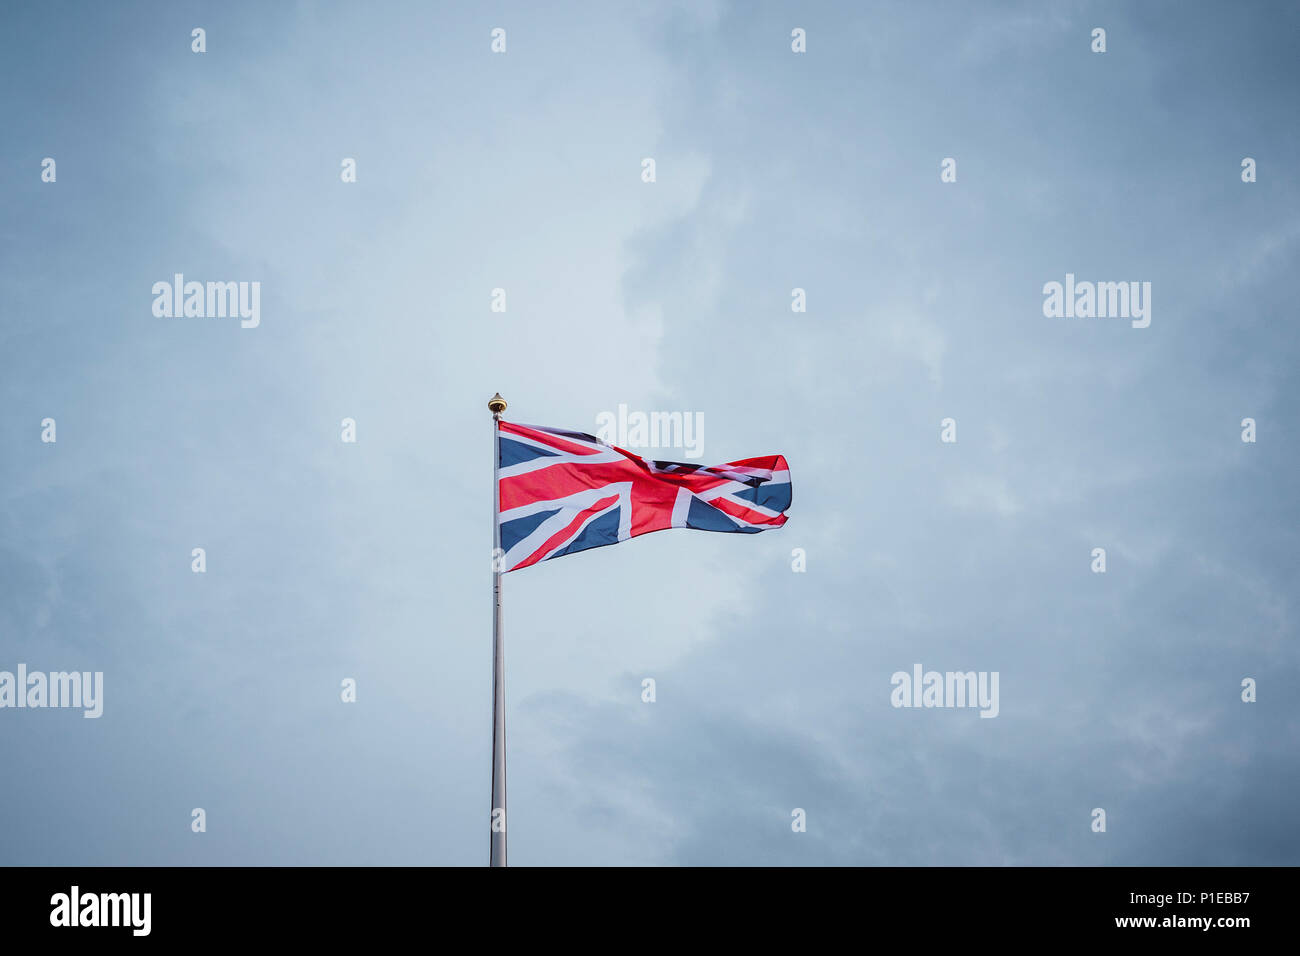 Waving flag in front of blue sky, United Kingdom Stock Photo